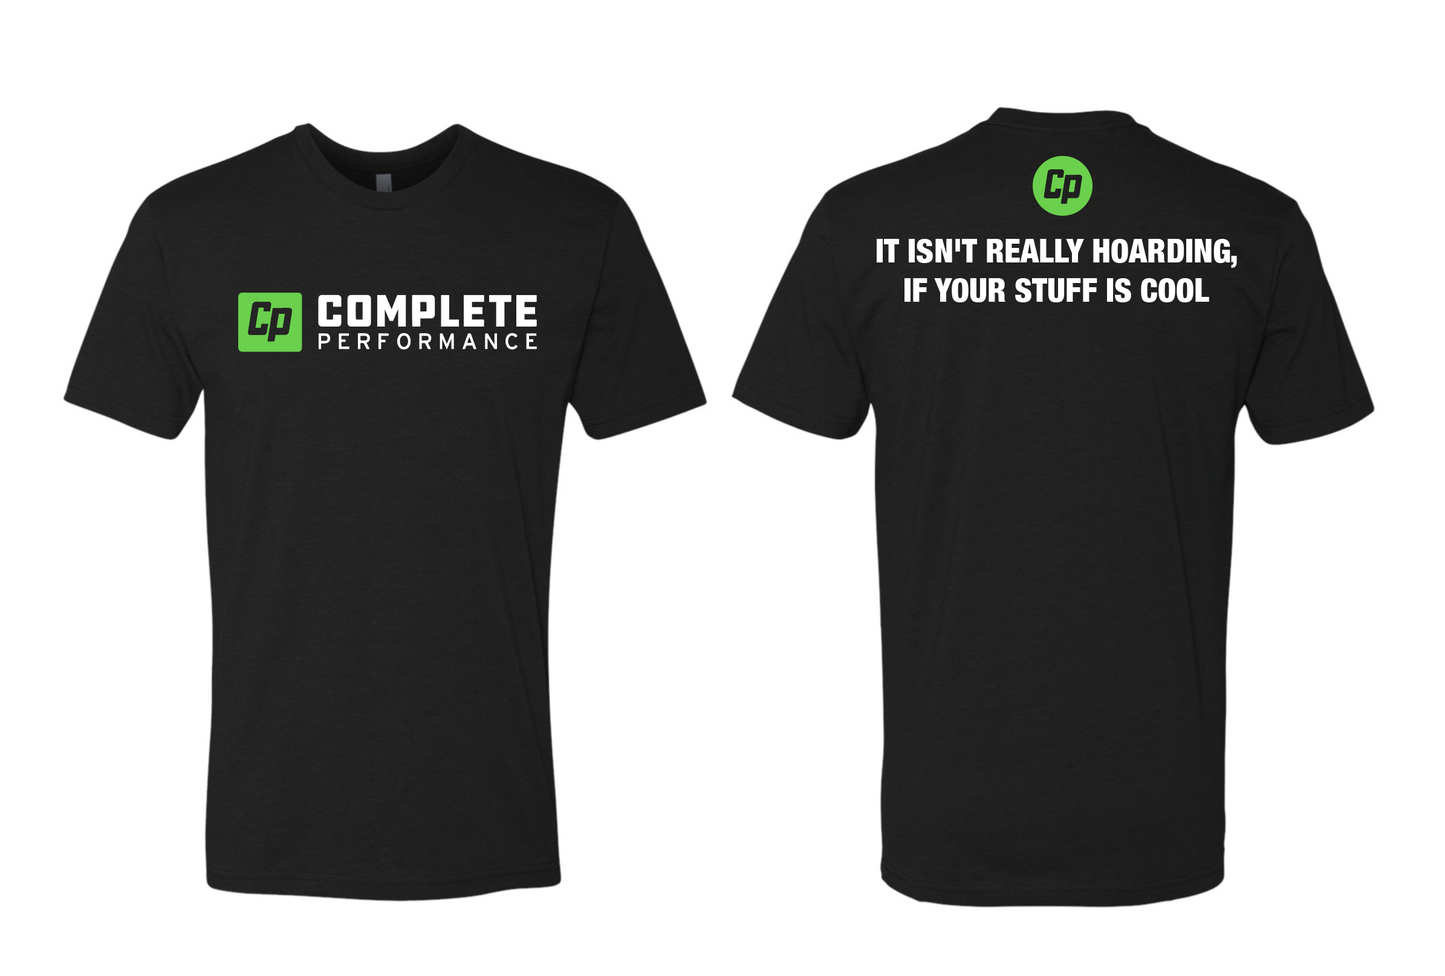 Complete Performance Hoarding T-Shirt